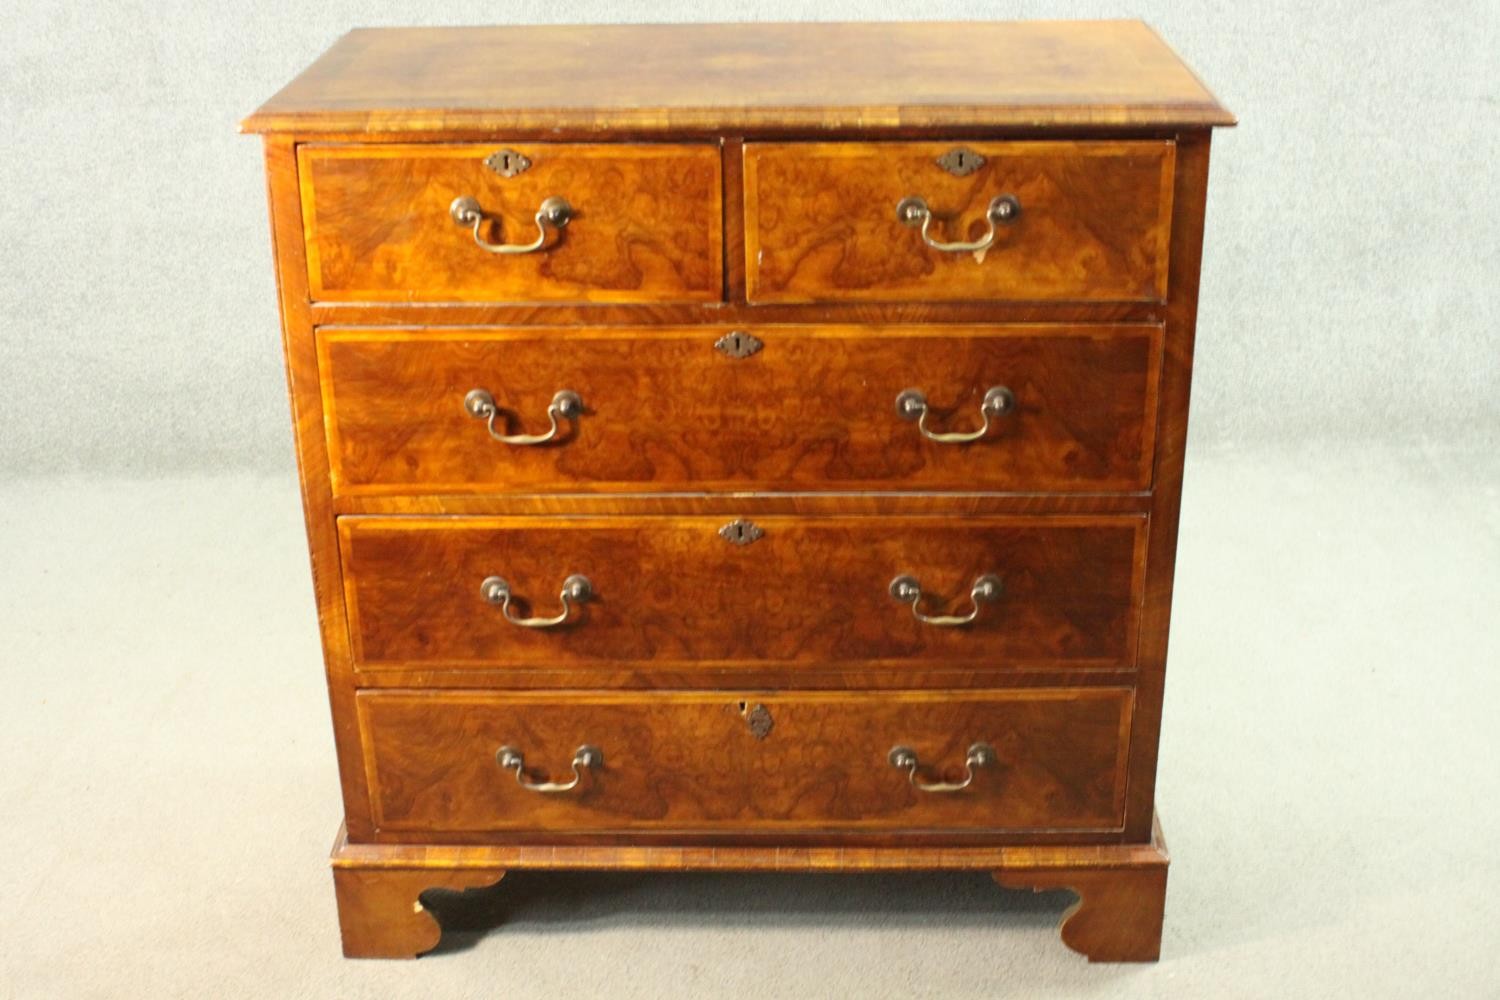 A 19th century early Georgian style walnut, crossbanded and featherbanded chest of drawers with - Image 3 of 8